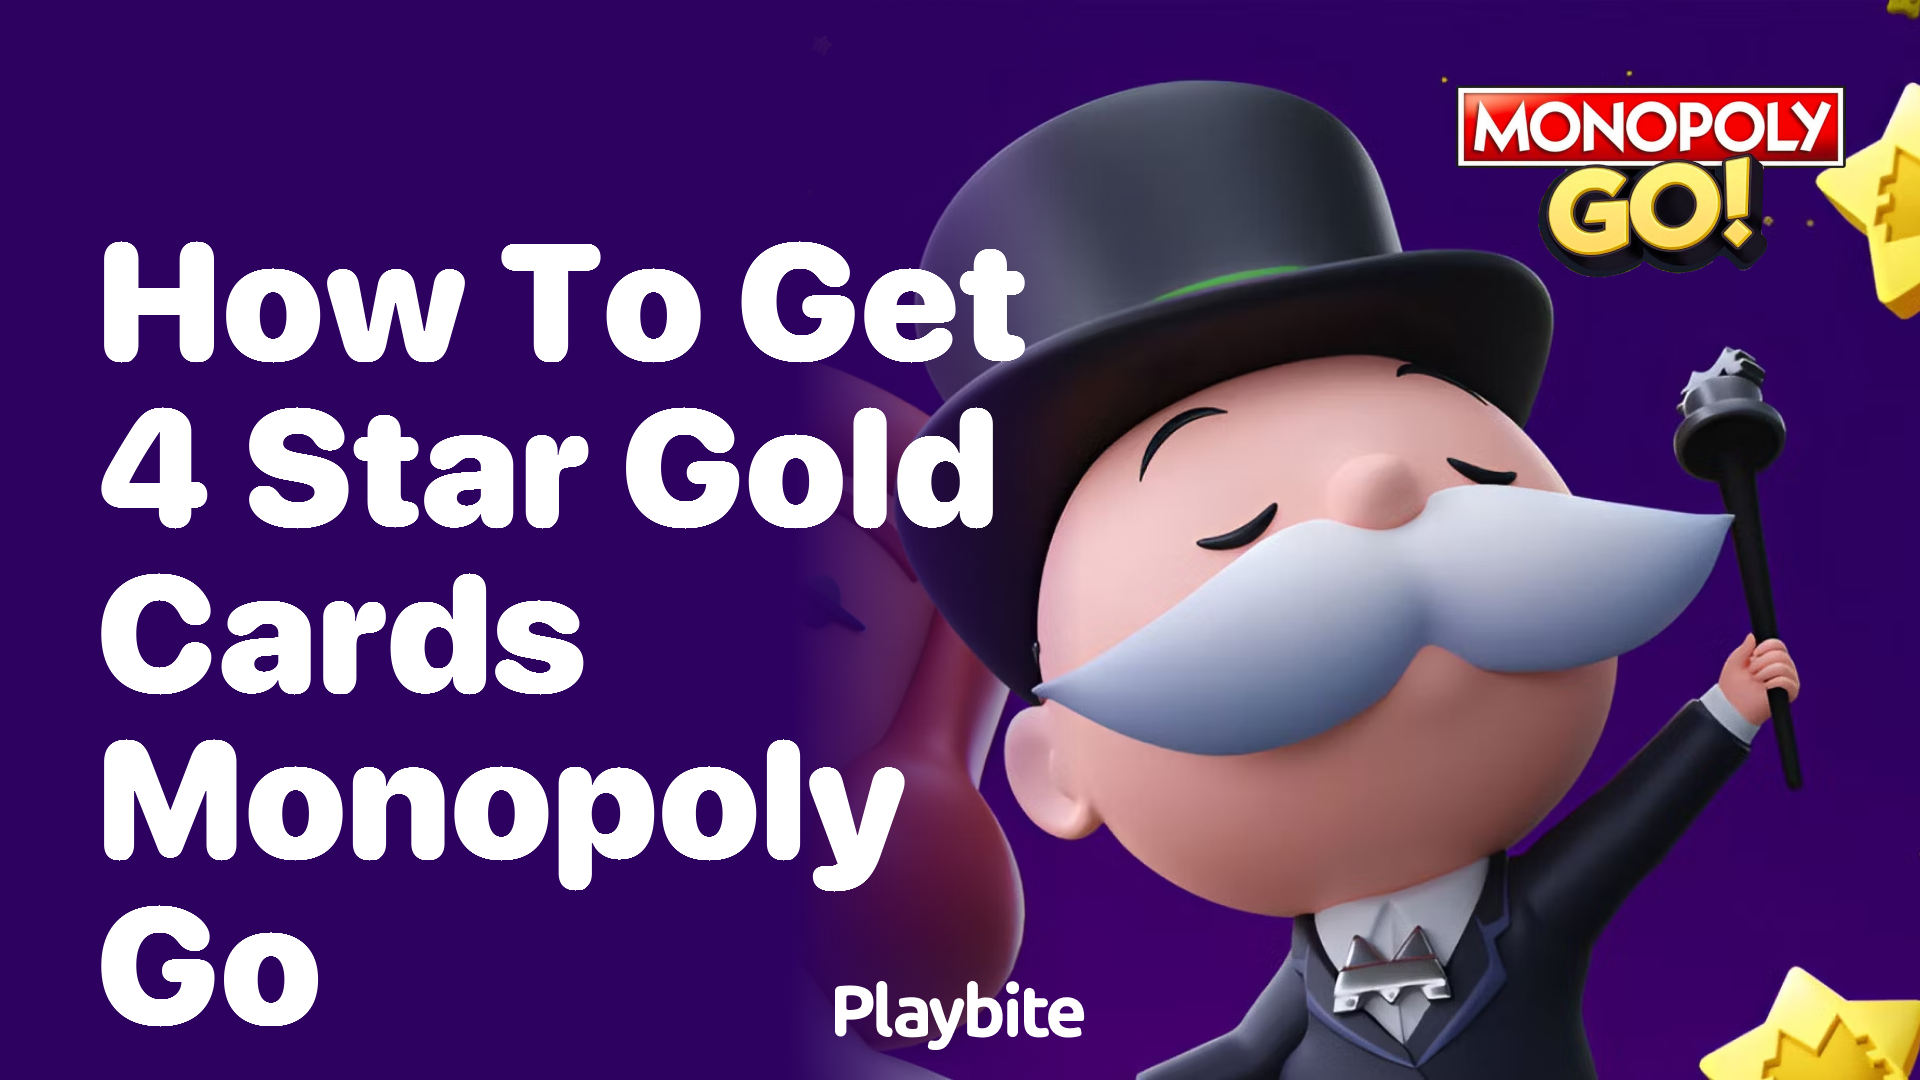 How to Get 4 Star Gold Cards in Monopoly Go